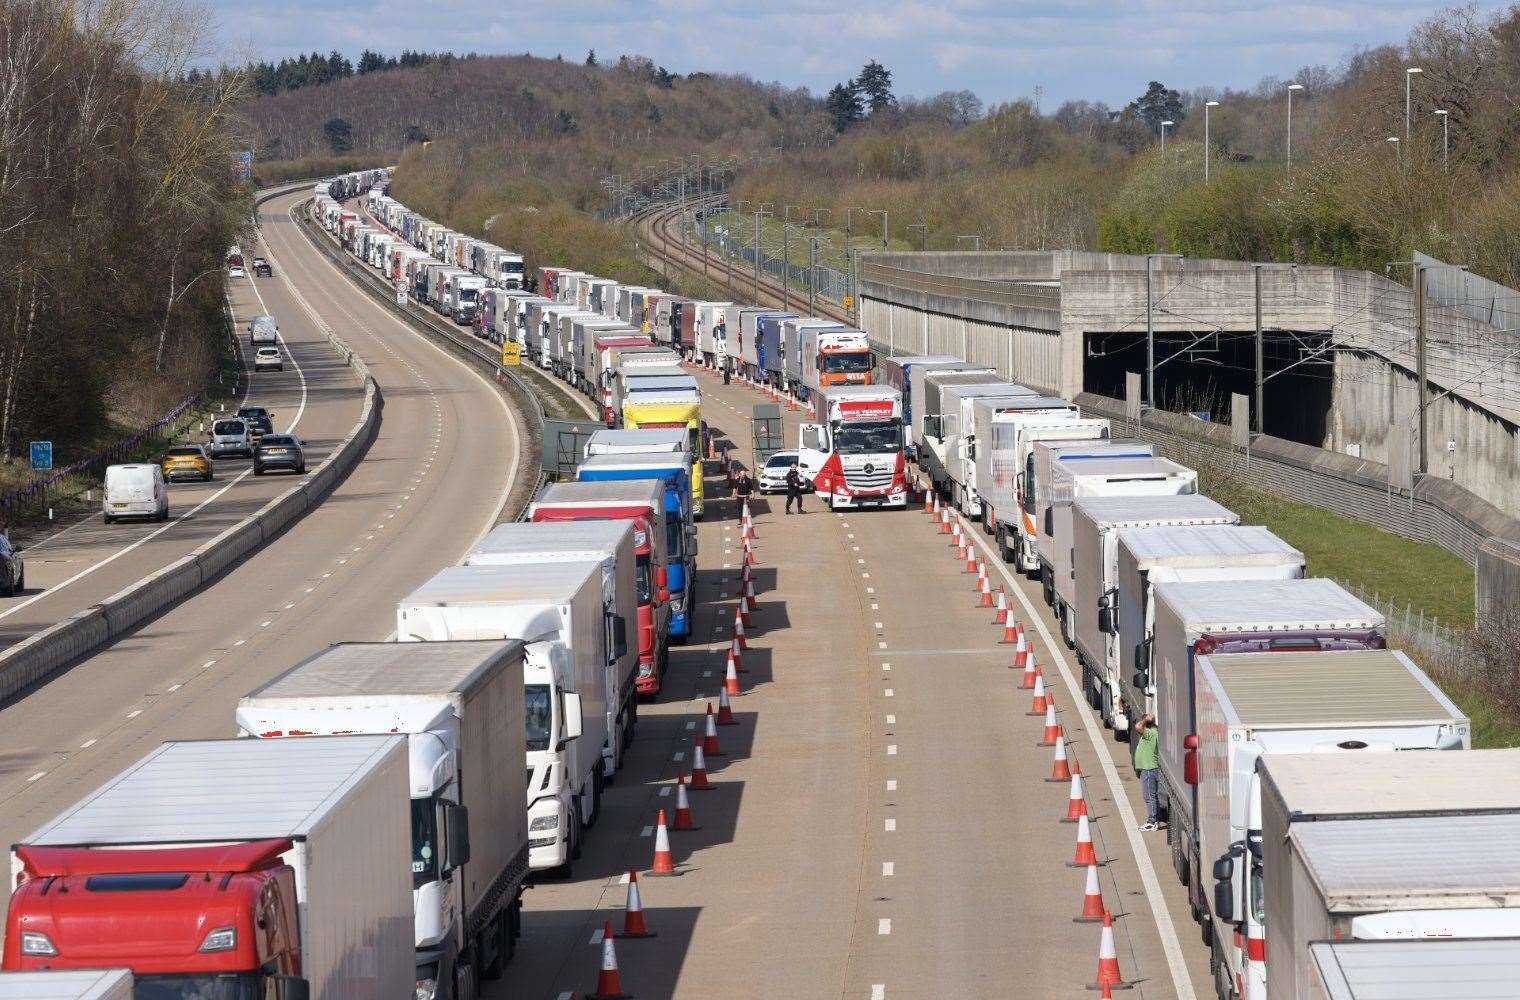 Lorries are stacked up for as far as the eye can see. Picture: UKNIP